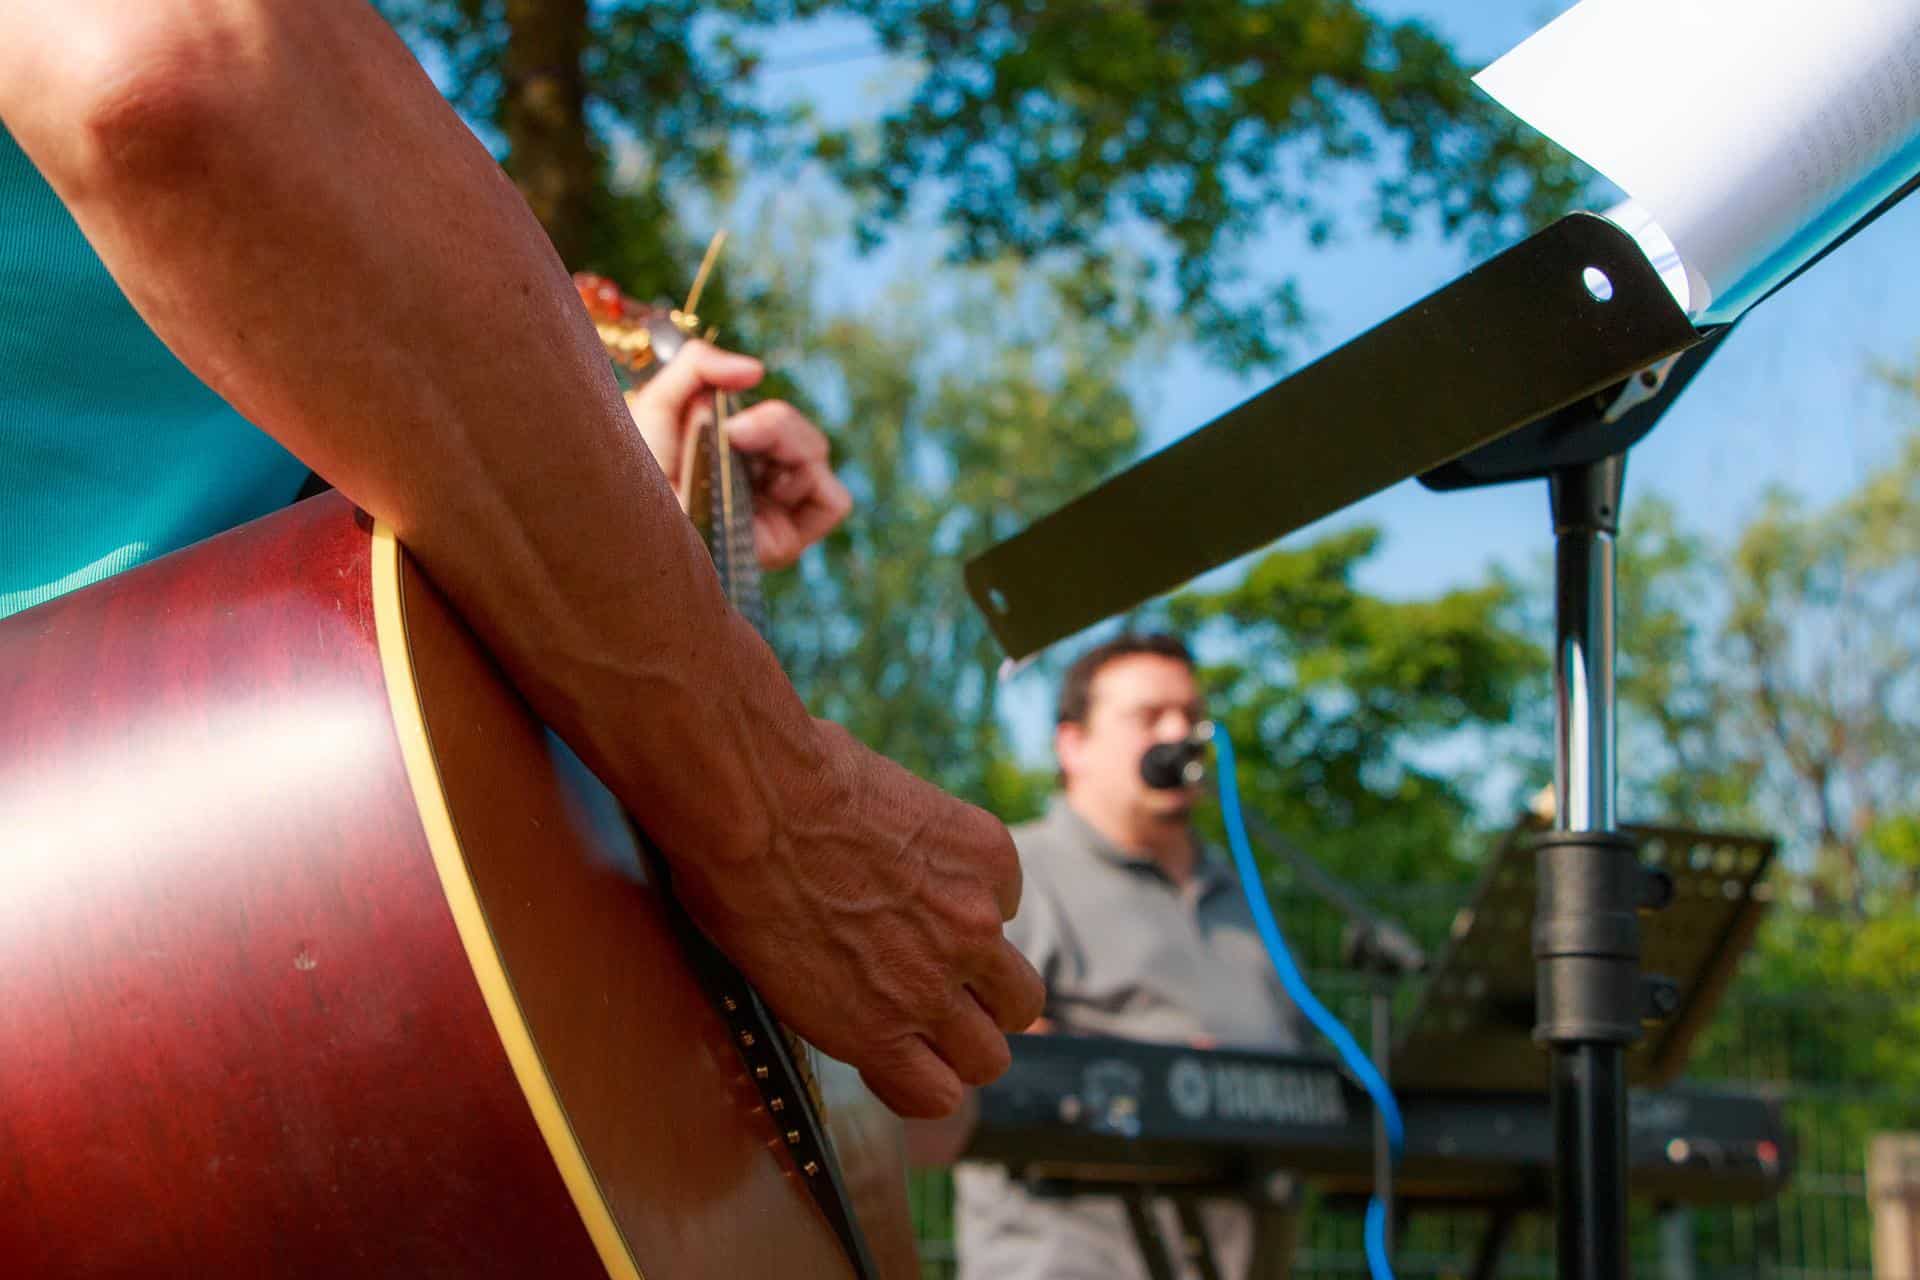 people playing a guitar and keyboard in an outdoor setting